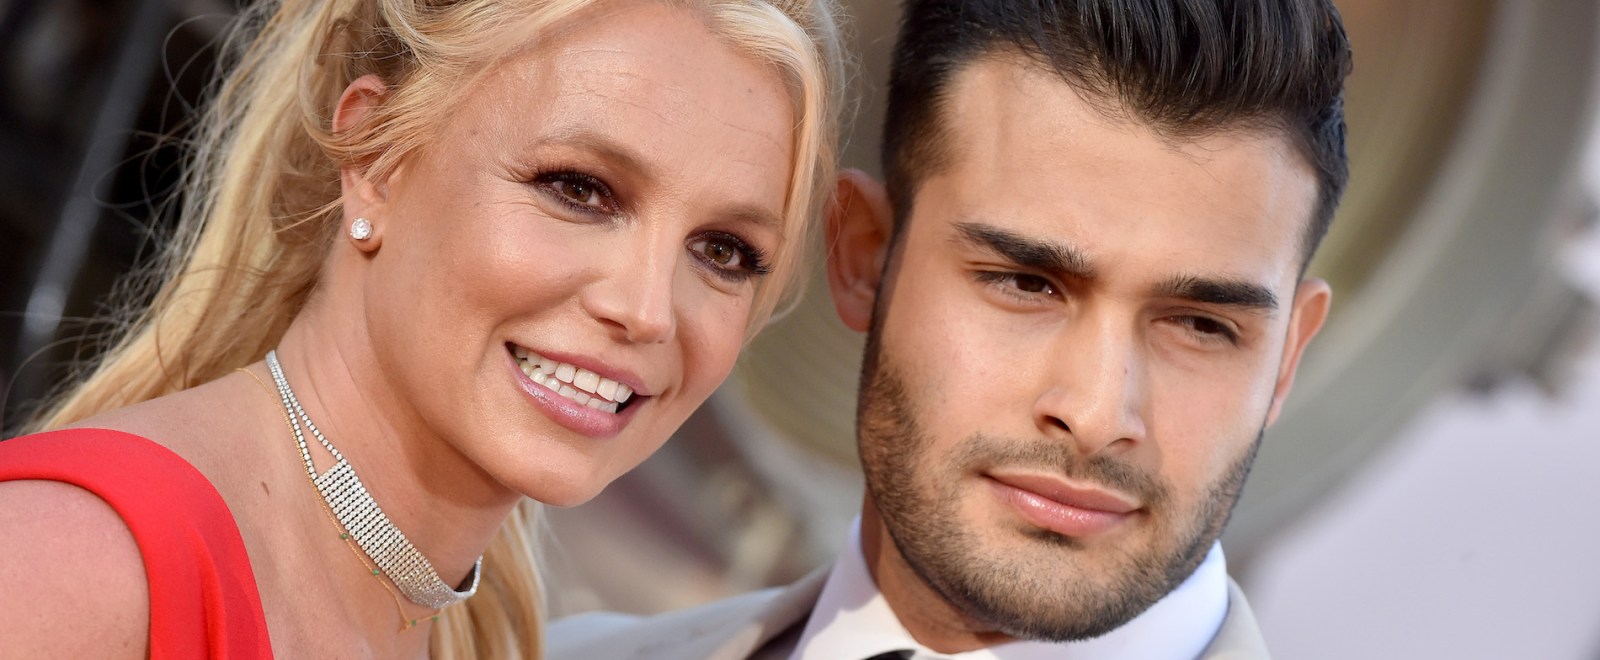 Britney Spears Sam Asghari Once Upon a Time in Hollywood premiere 2019